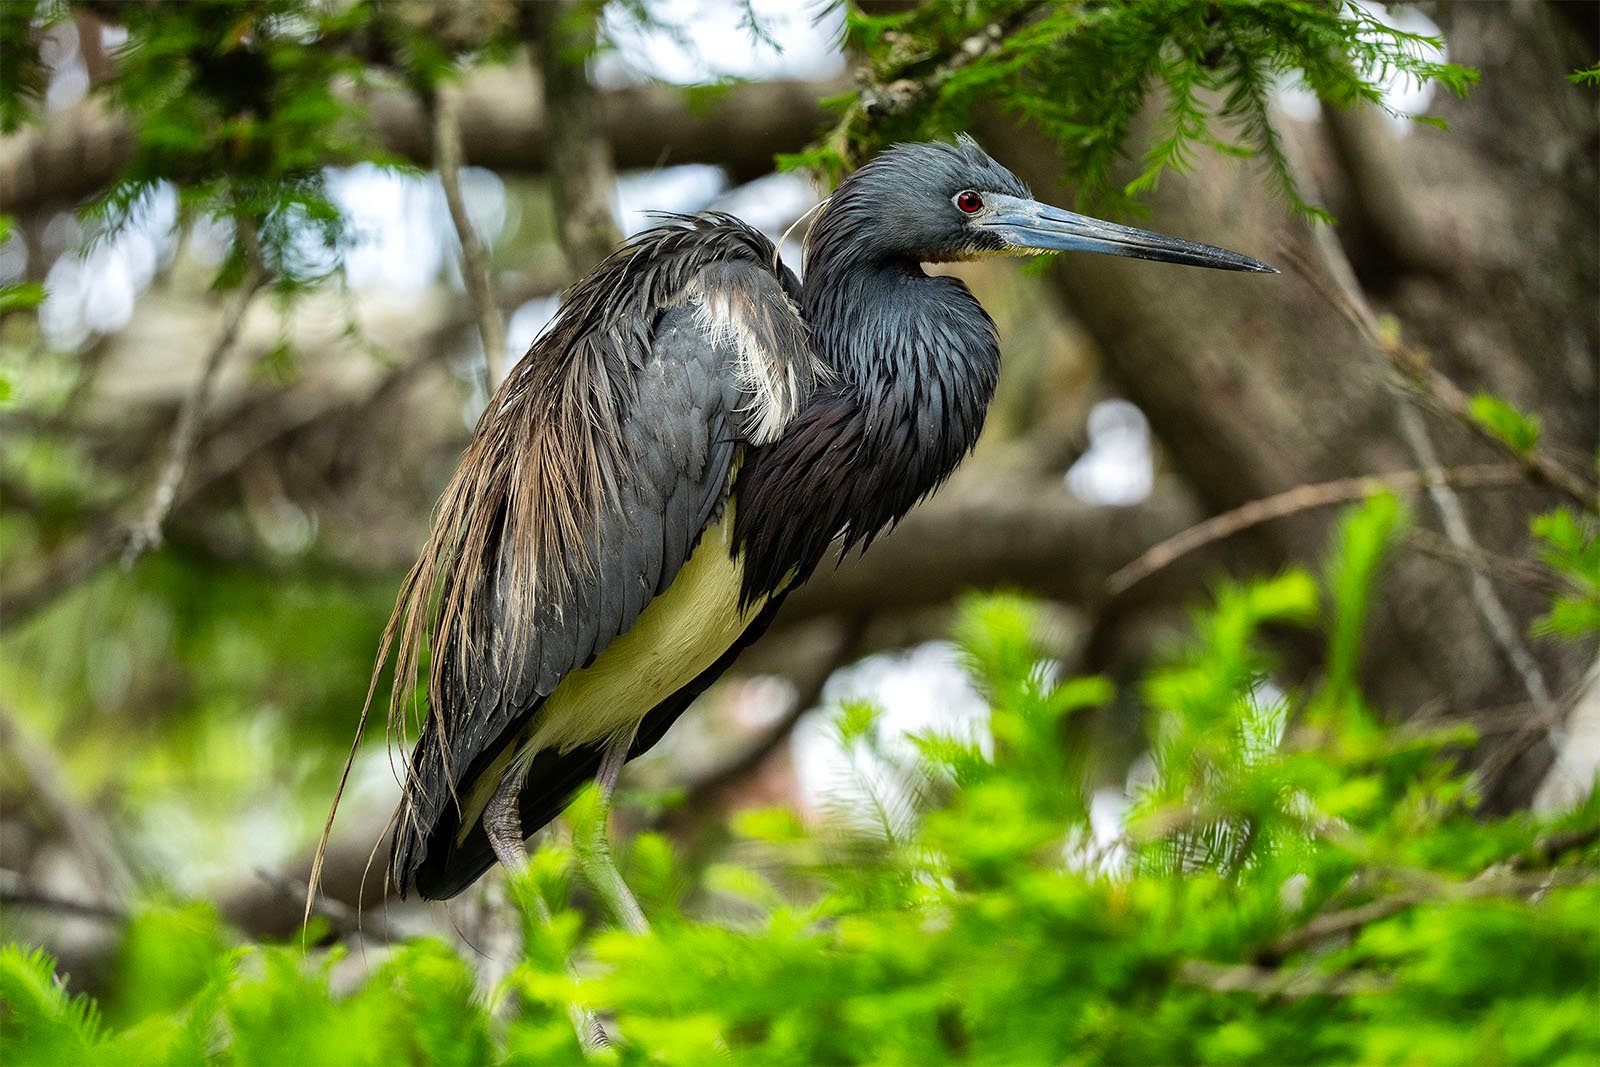 A dark-feathered heron with long legs and a pointed beak perches on a tree branch surrounded by lush green foliage. The bird's piercing eyes and sleek plumage stand out against the natural, blurred background.